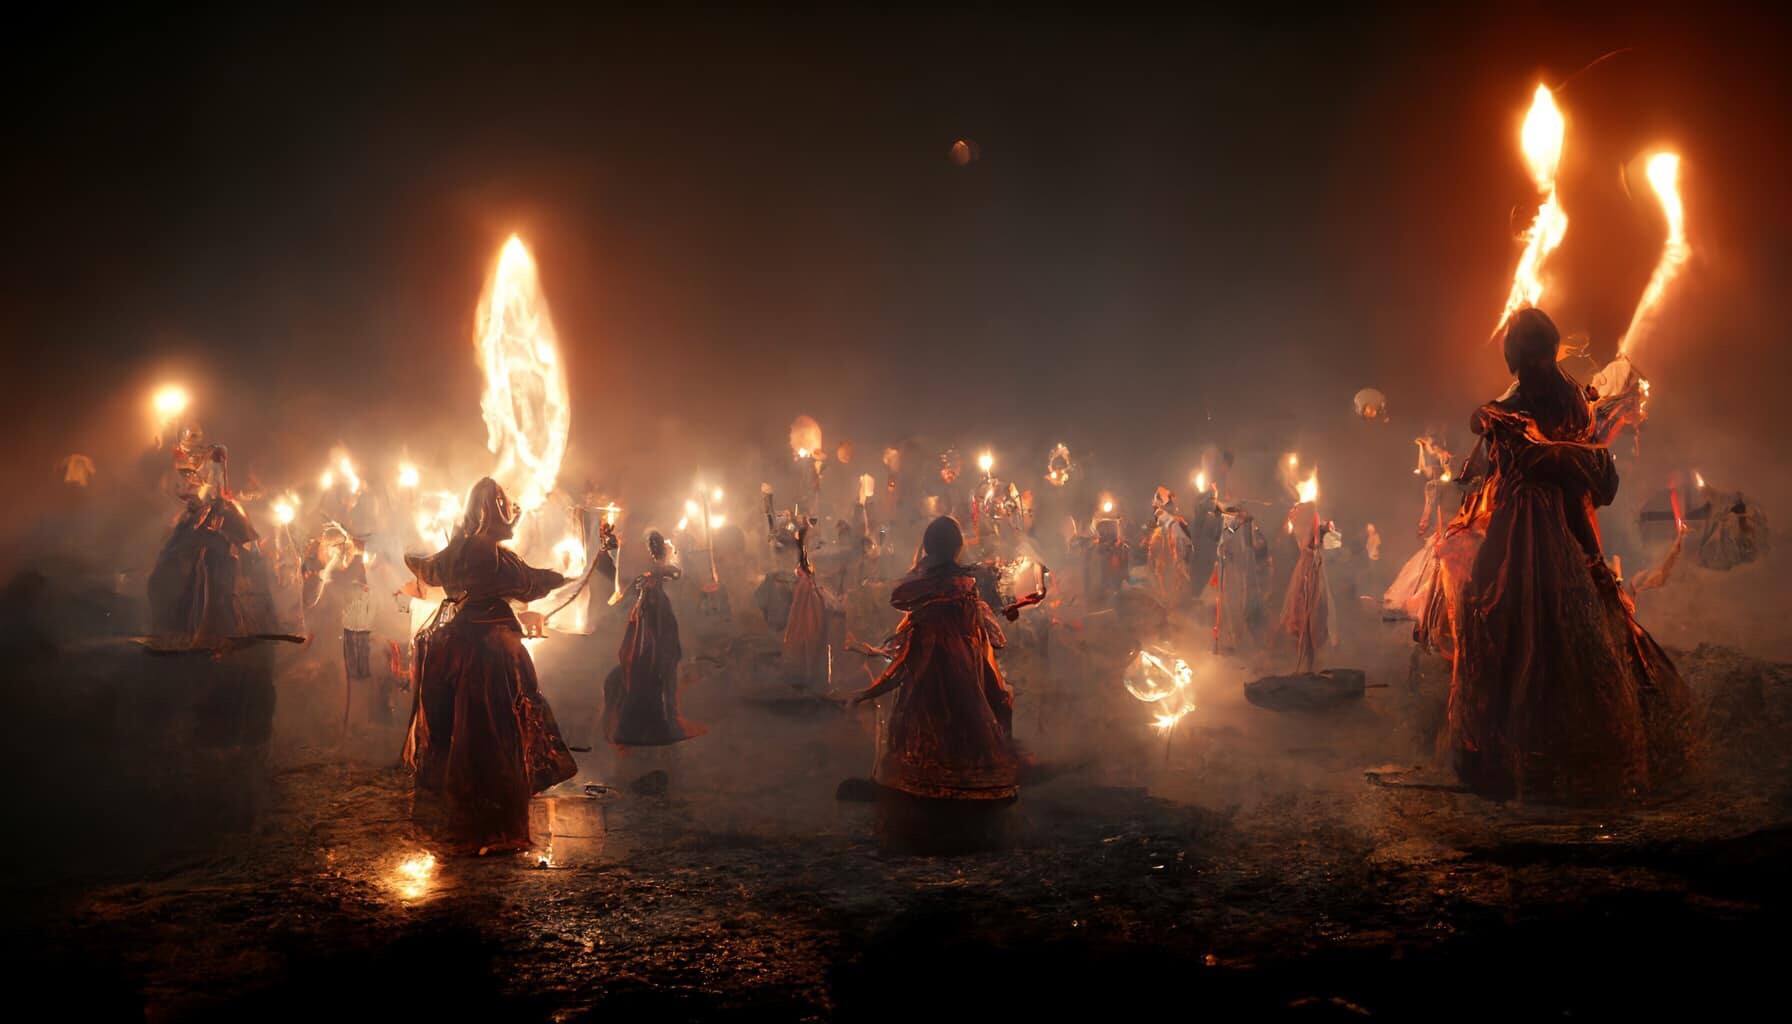 ArtStation - Fire Sorcerers at the Festival